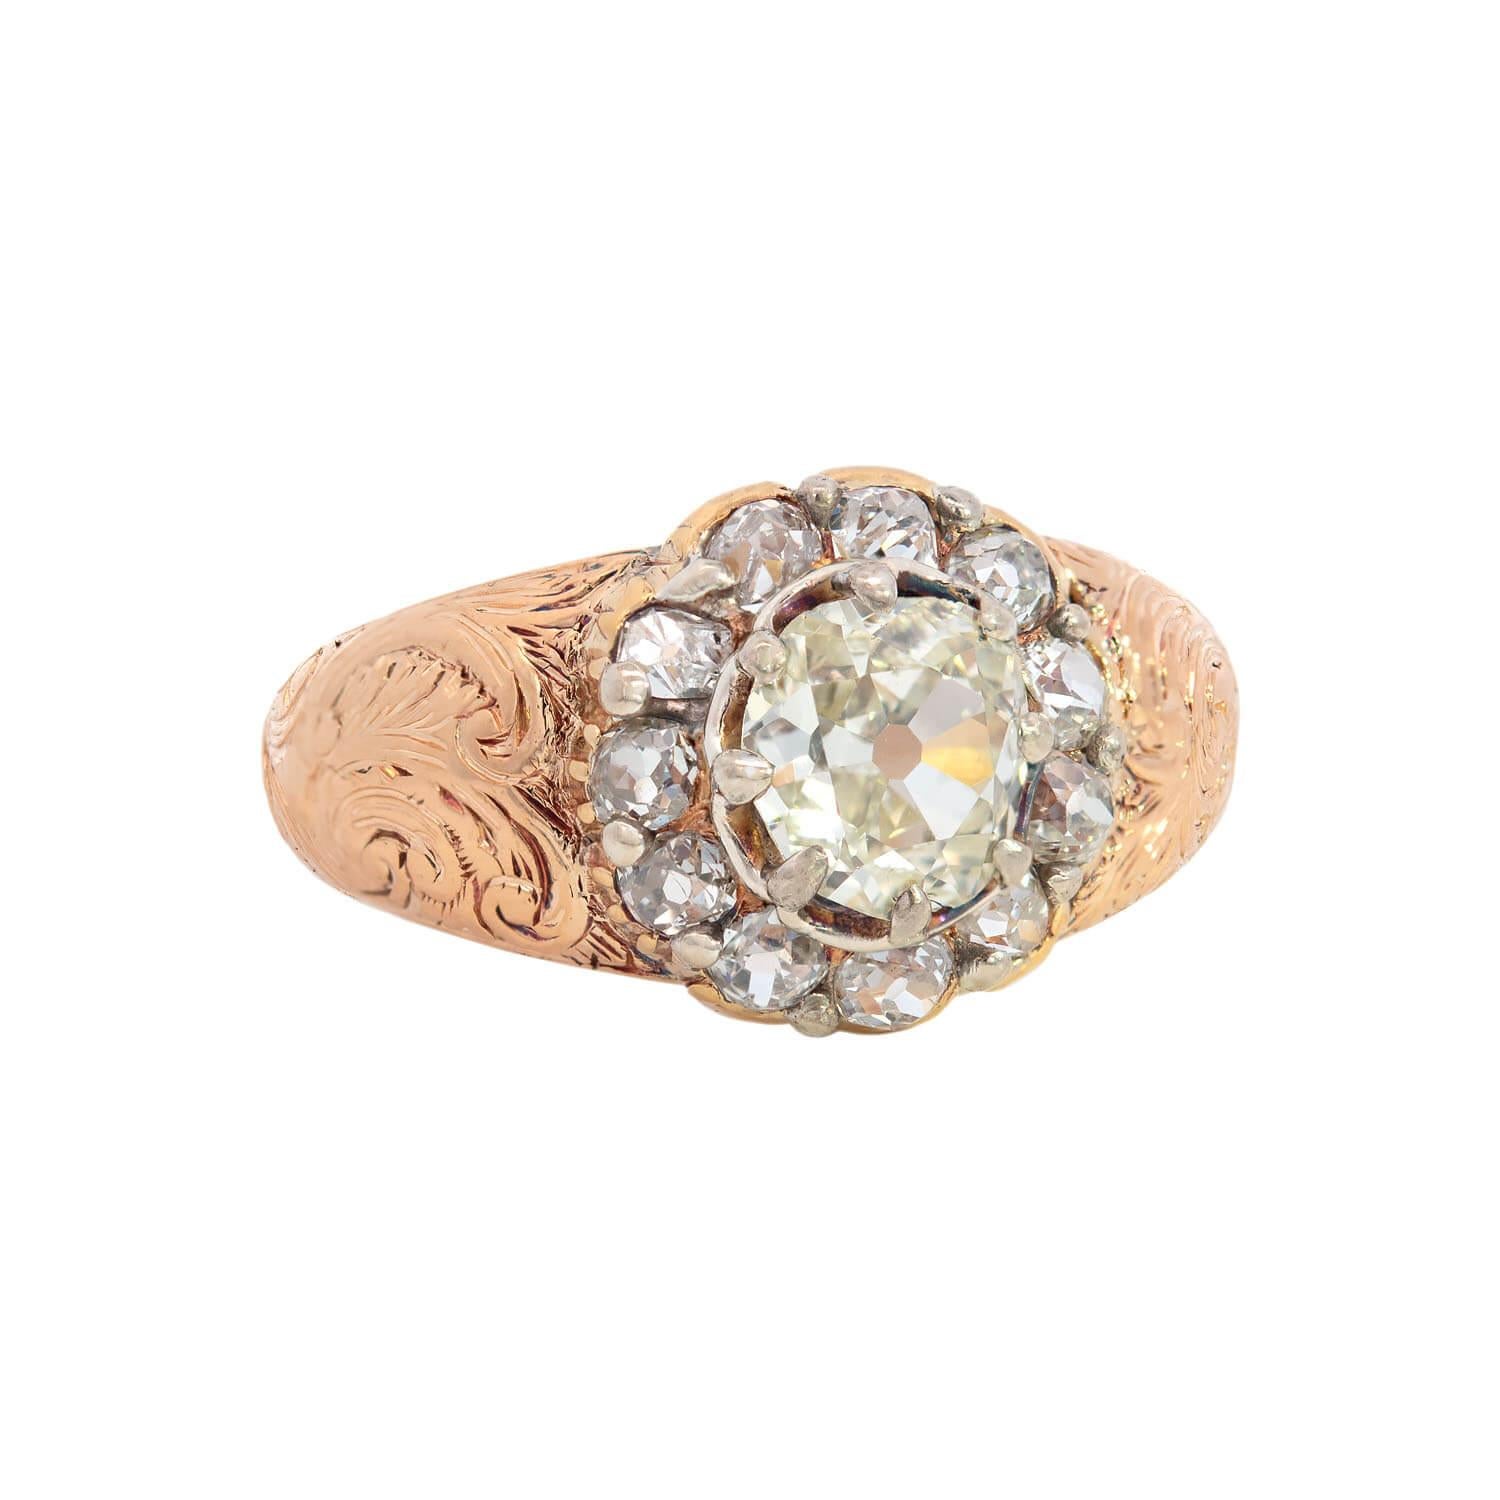 A gorgeous diamond cluster ring from the Victorian (ca1850s) era! This exquisite ring is made of vibrant 22kt yellow gold topped in sterling silver. A sparkling 1.35ct old mine cut diamond of K/L color and VS1-VS2 clarity is surrounded by eleven